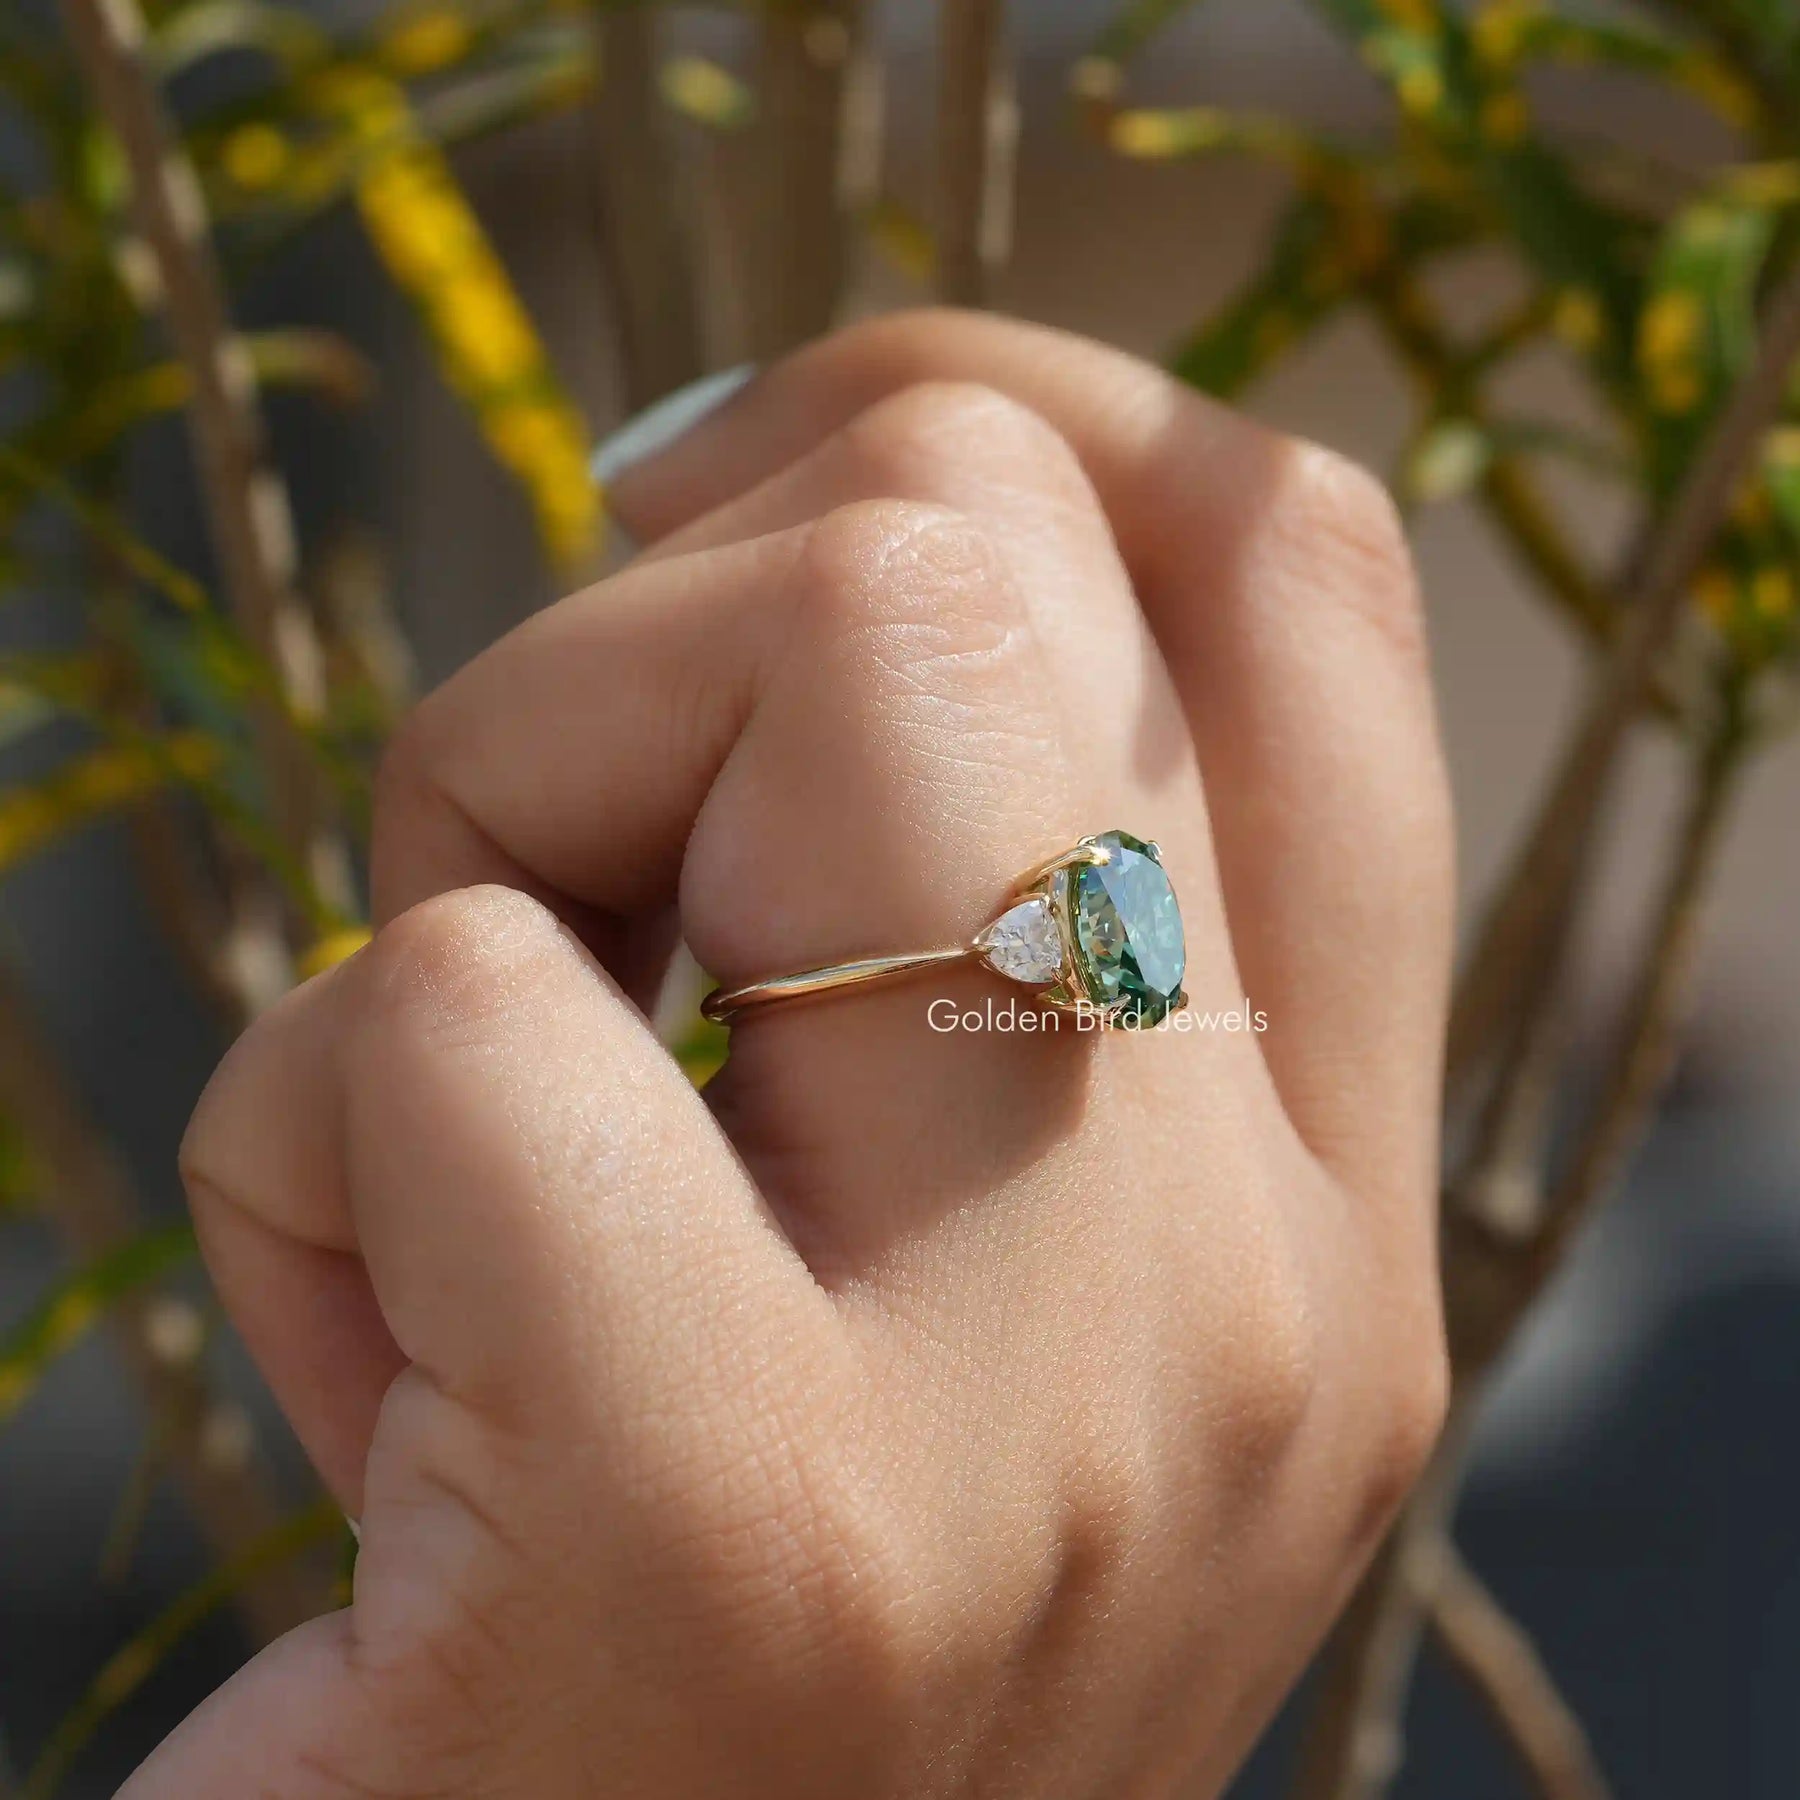 [In finger side view of three stone moissanite ring set in prong setting]-[Golden Bird Jewels]